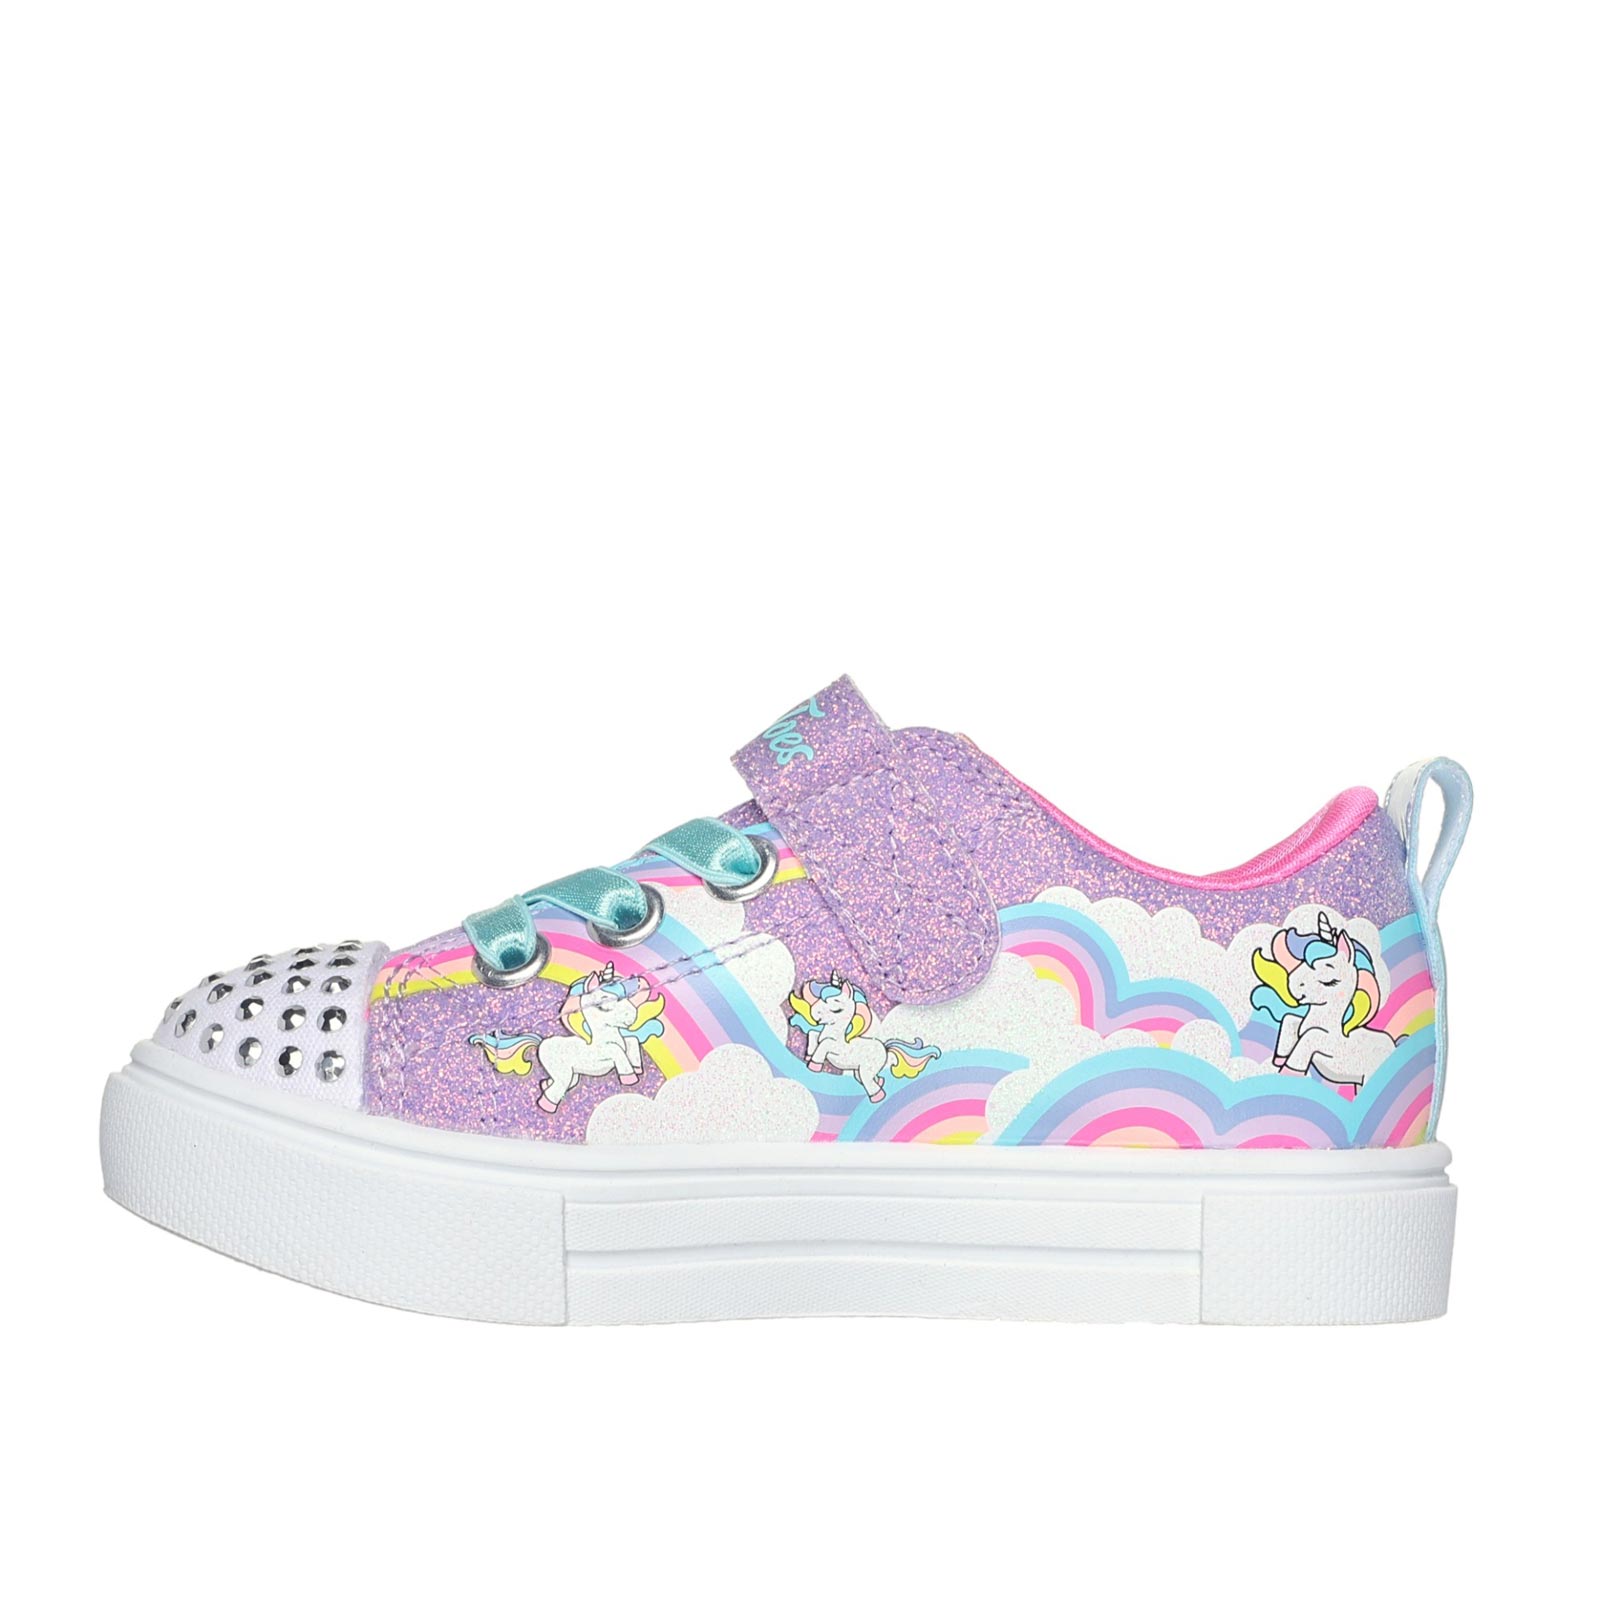 SKECHERS TWINKLE SPARKS CLOUDS GIRLS SHOES